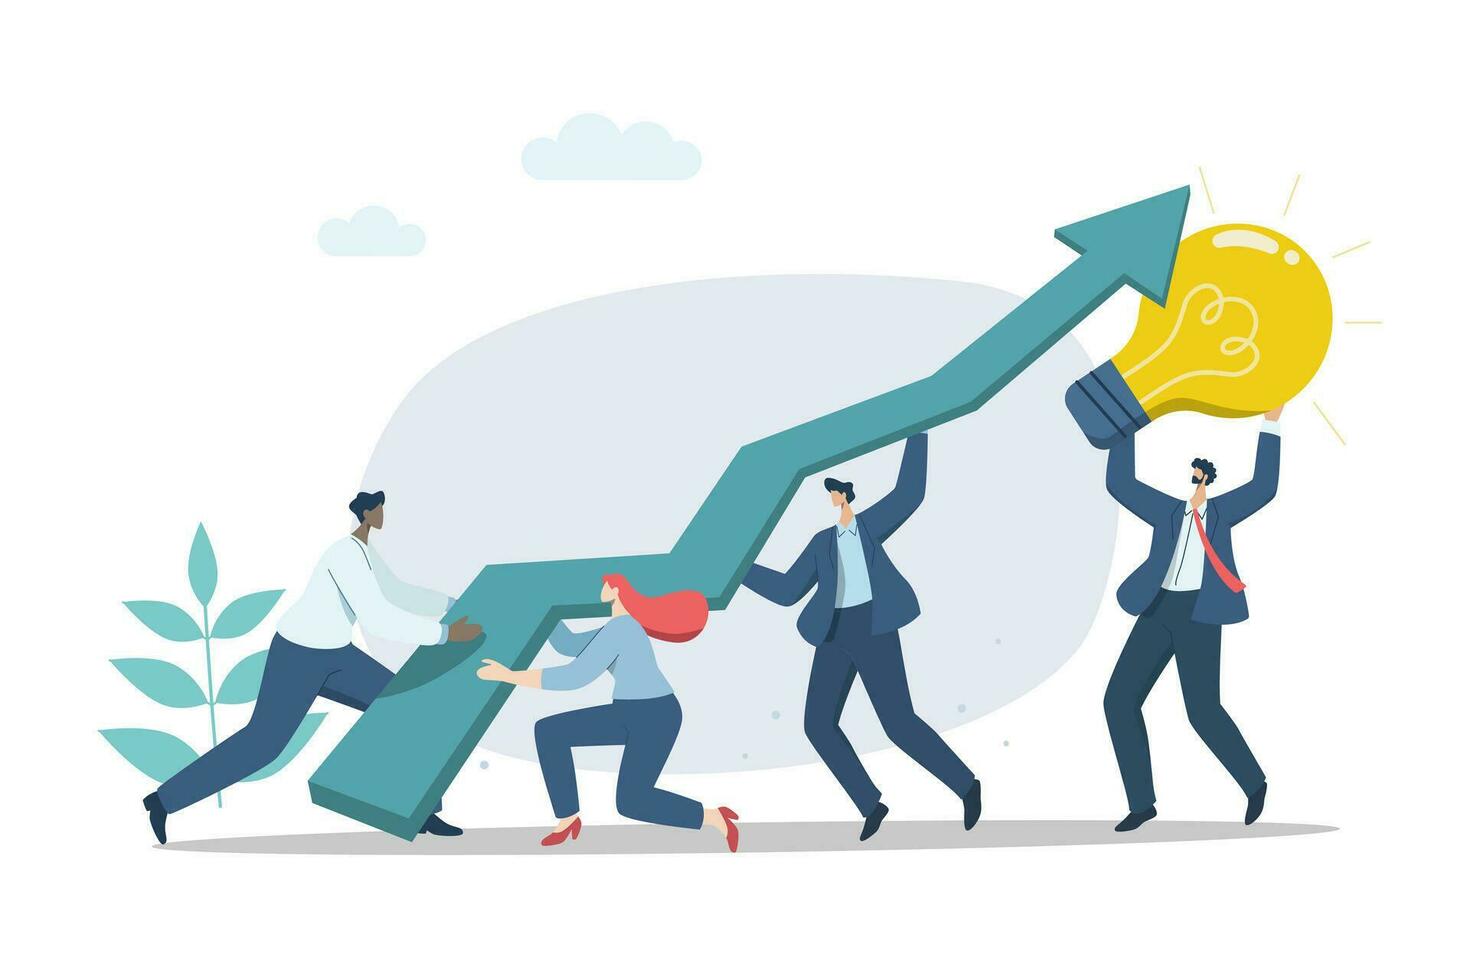 Teamwork to increase work efficiency and accomplished, Business team pushing the green graph and use effective ideas helps to lift the arrow graph to rise higher. vector